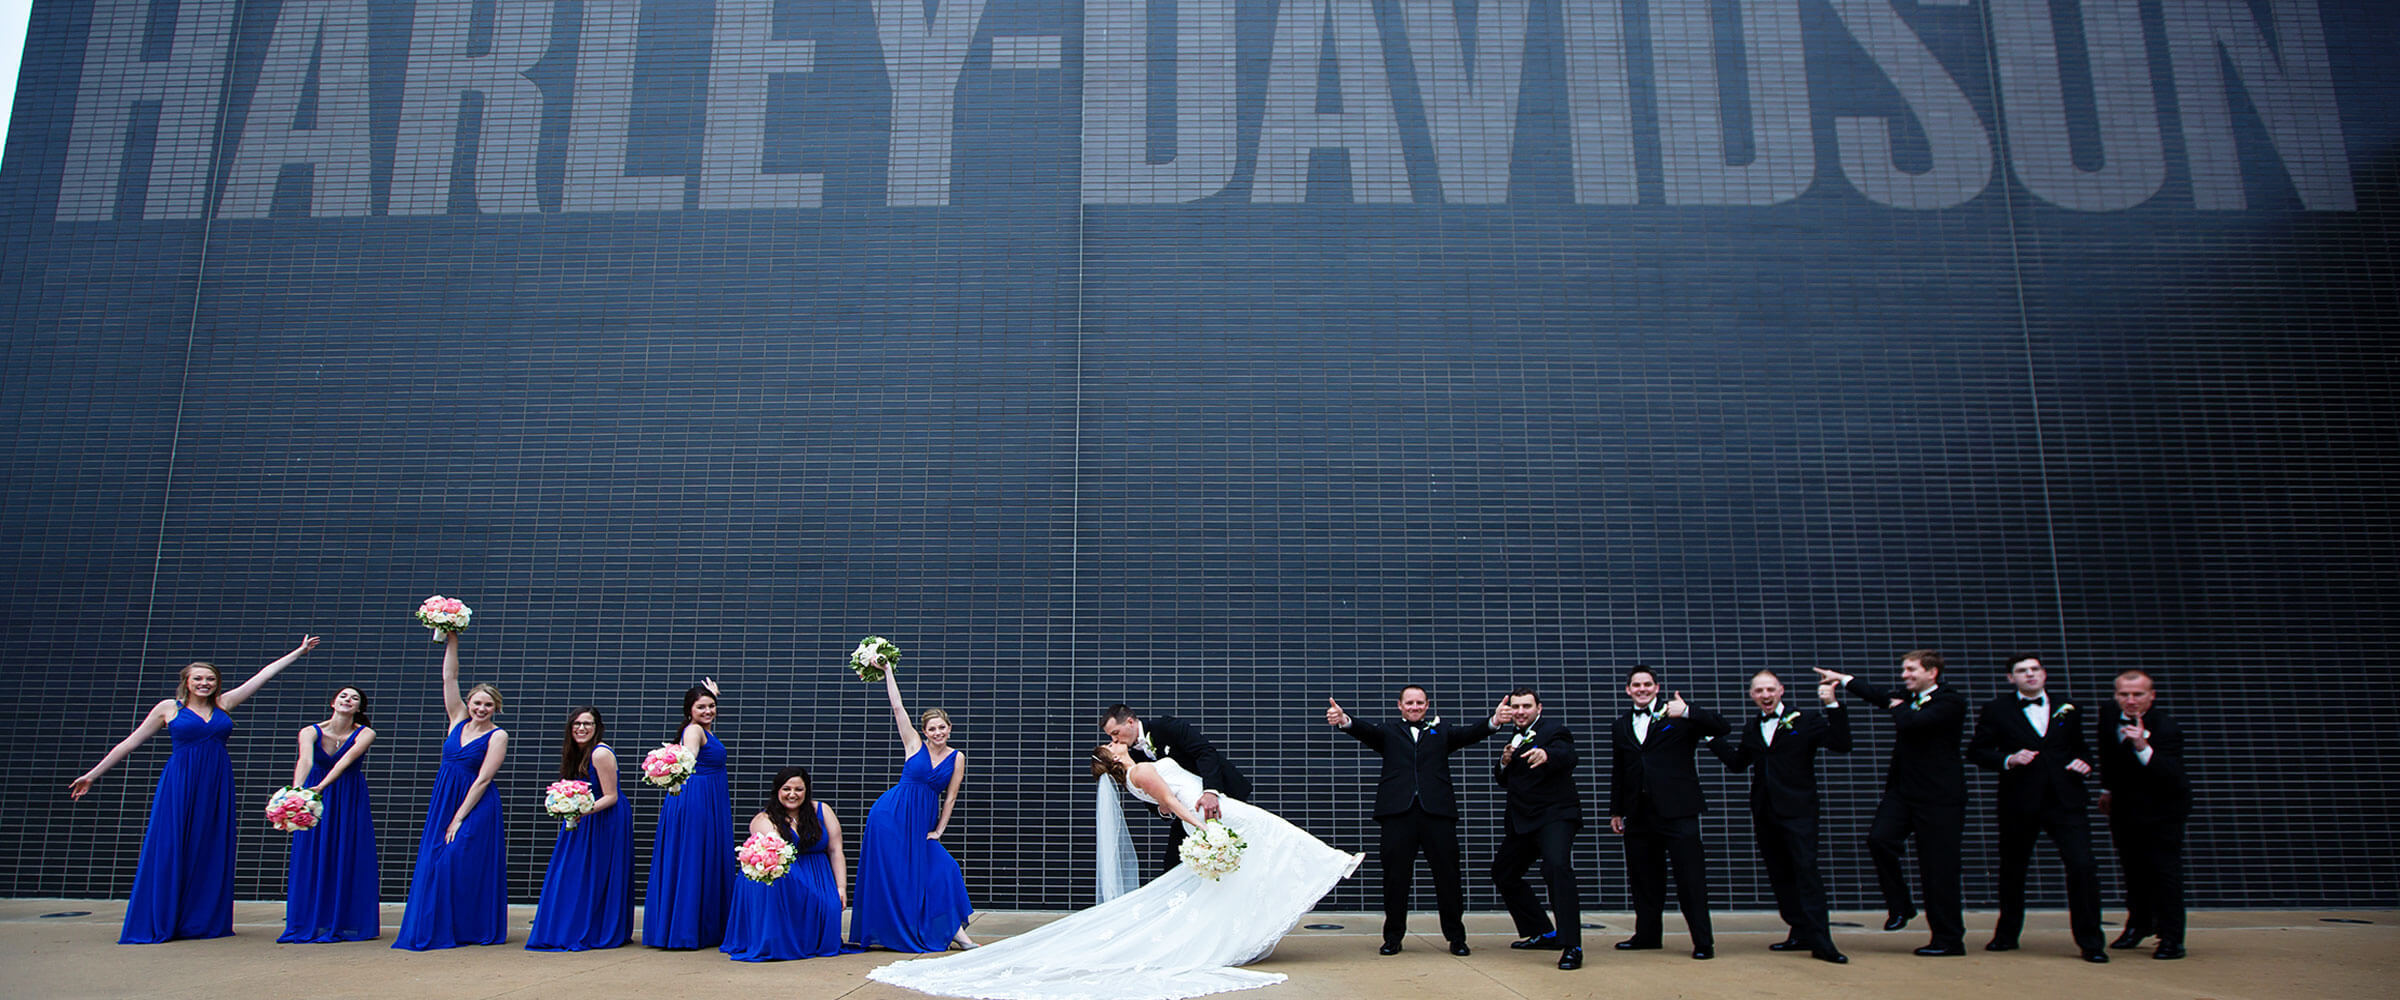 Weddings at 1903 Events, at the Harley Davidson Museum